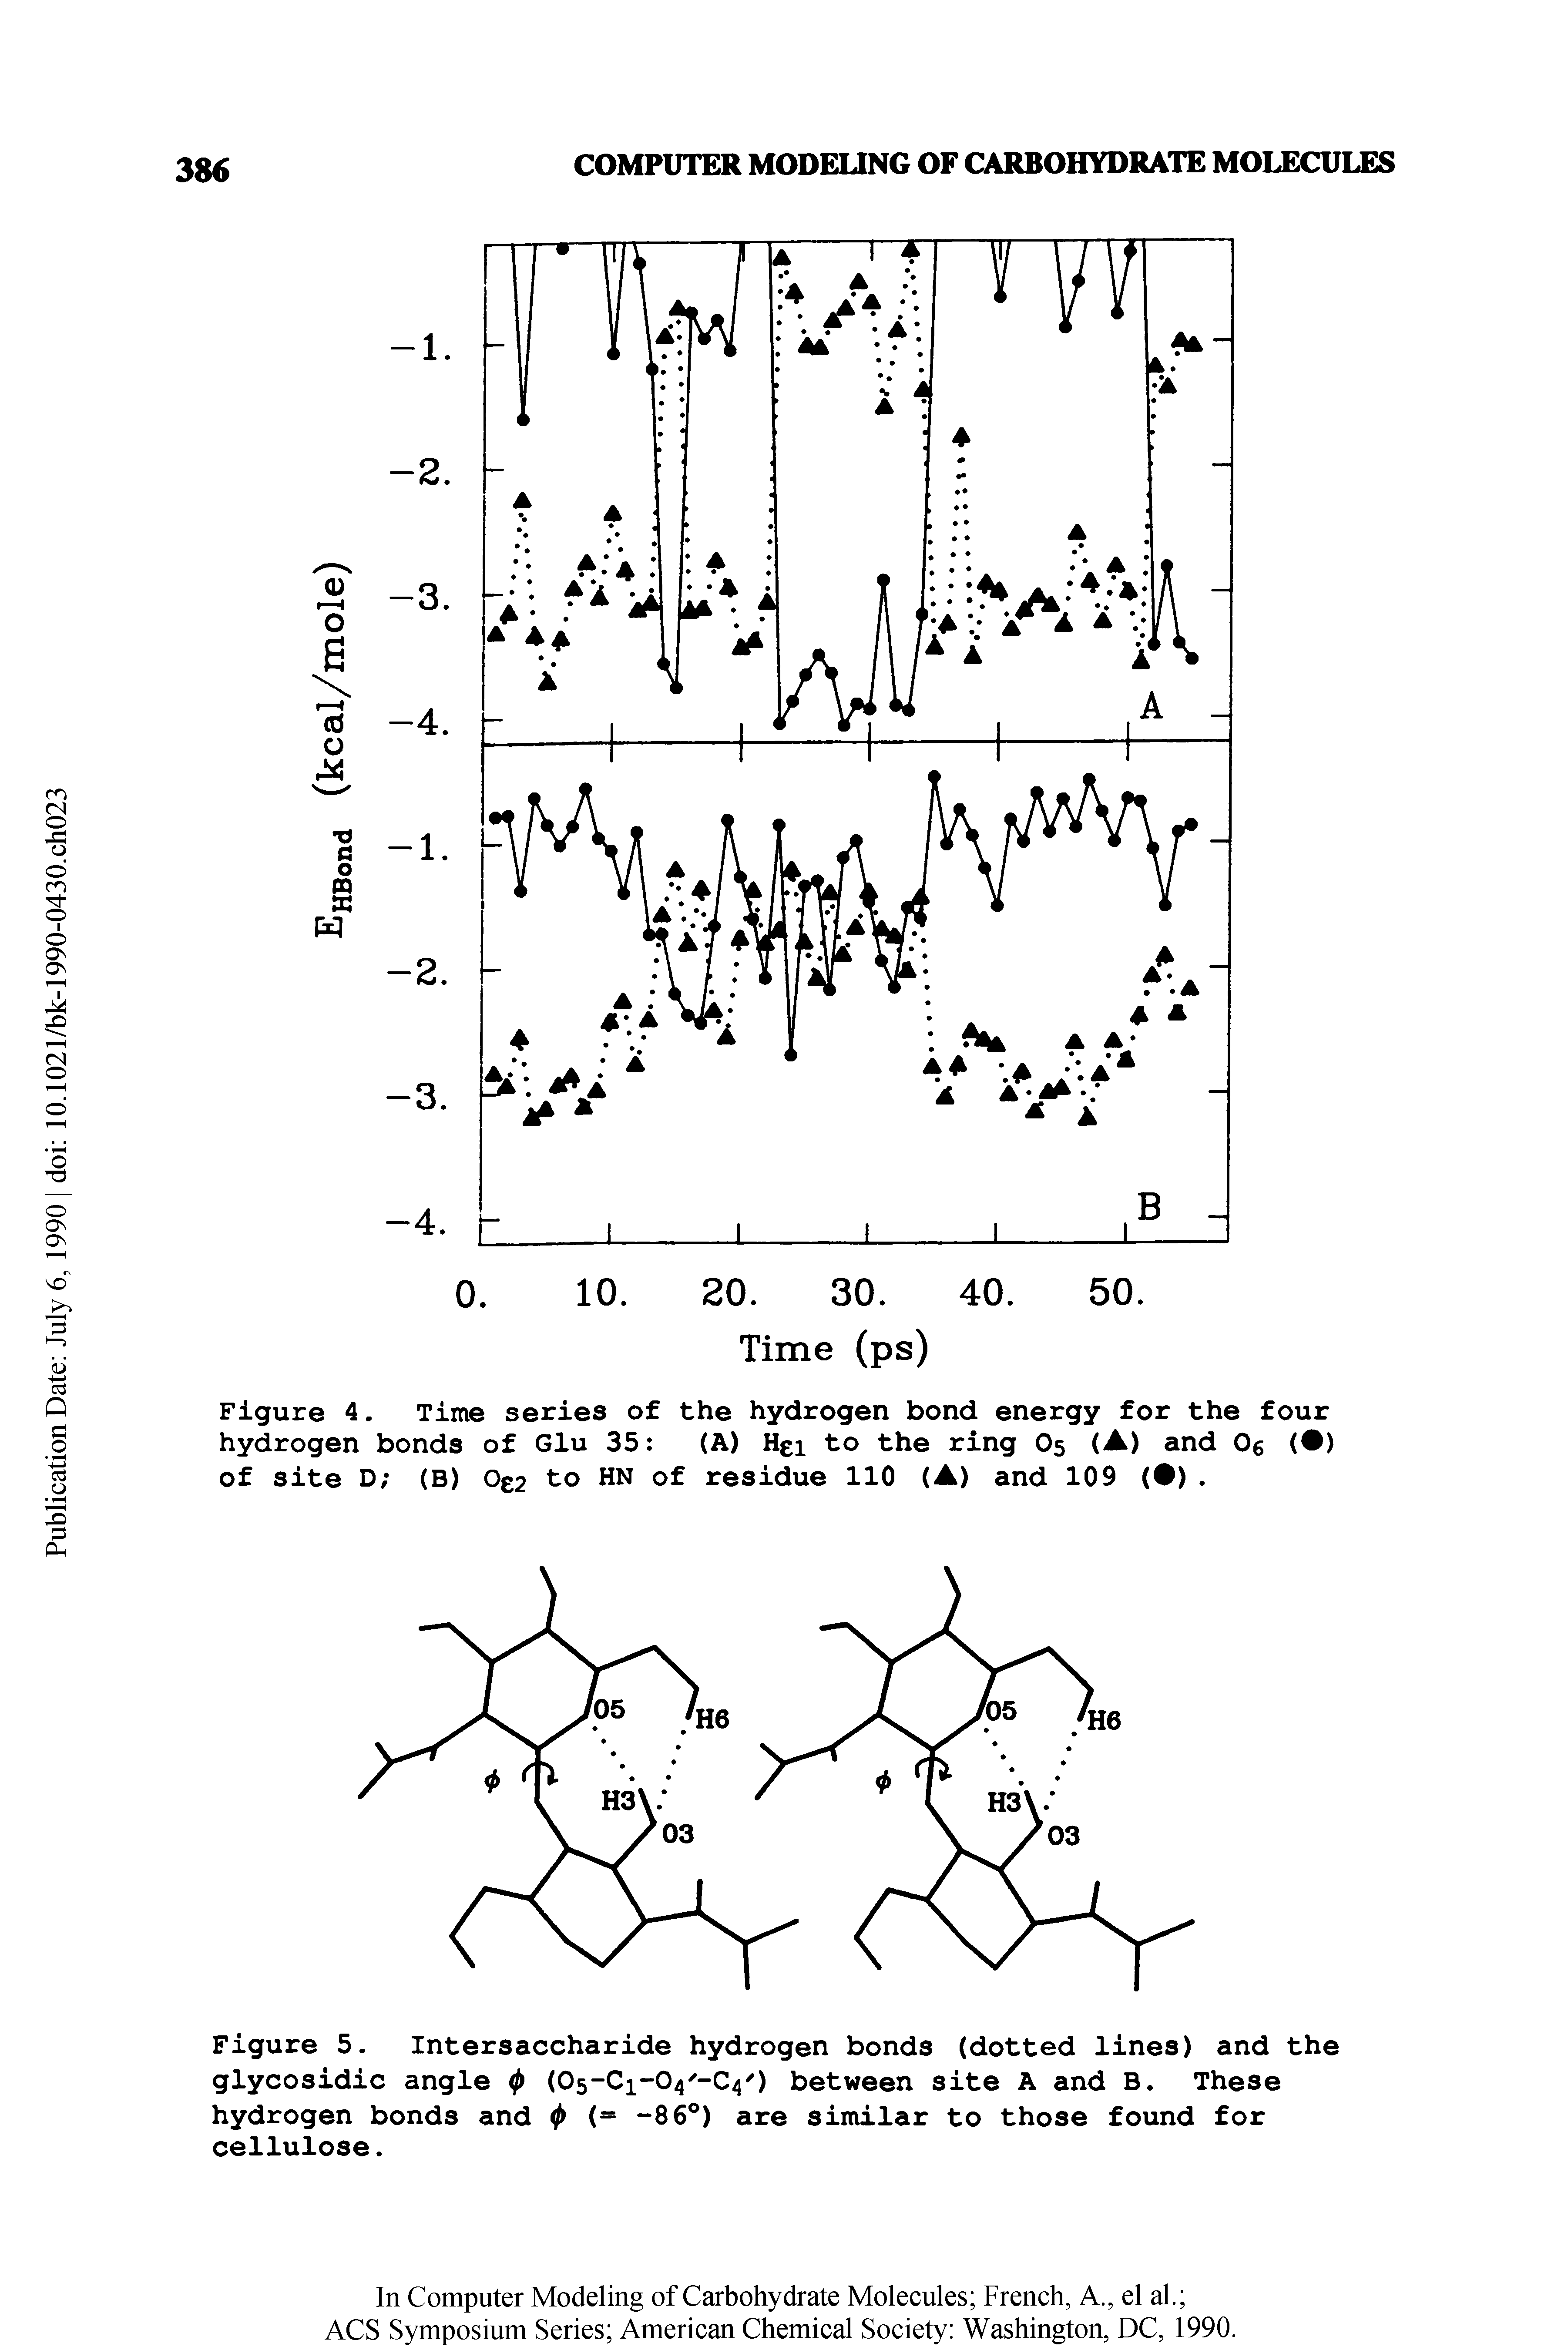 Figure 5. Intersaccharide hydrogen bonds (dotted lines) and the glycosidic angle 0 (05-01-04 -04 ) between site A and B. These hydrogen bonds and 0 (= -86 ) are similar to those found for cellulose.